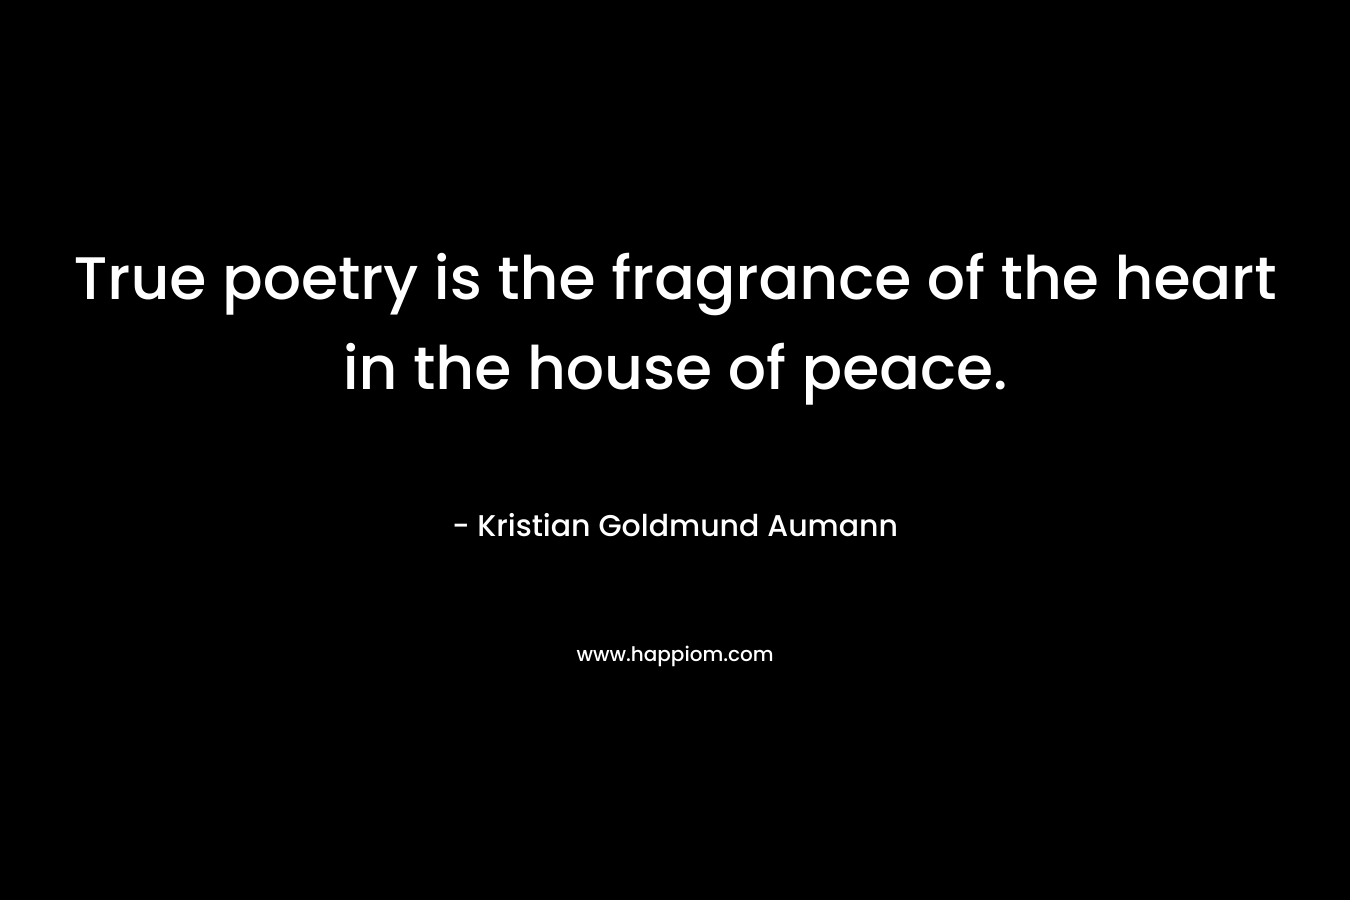 True poetry is the fragrance of the heart in the house of peace. – Kristian Goldmund Aumann